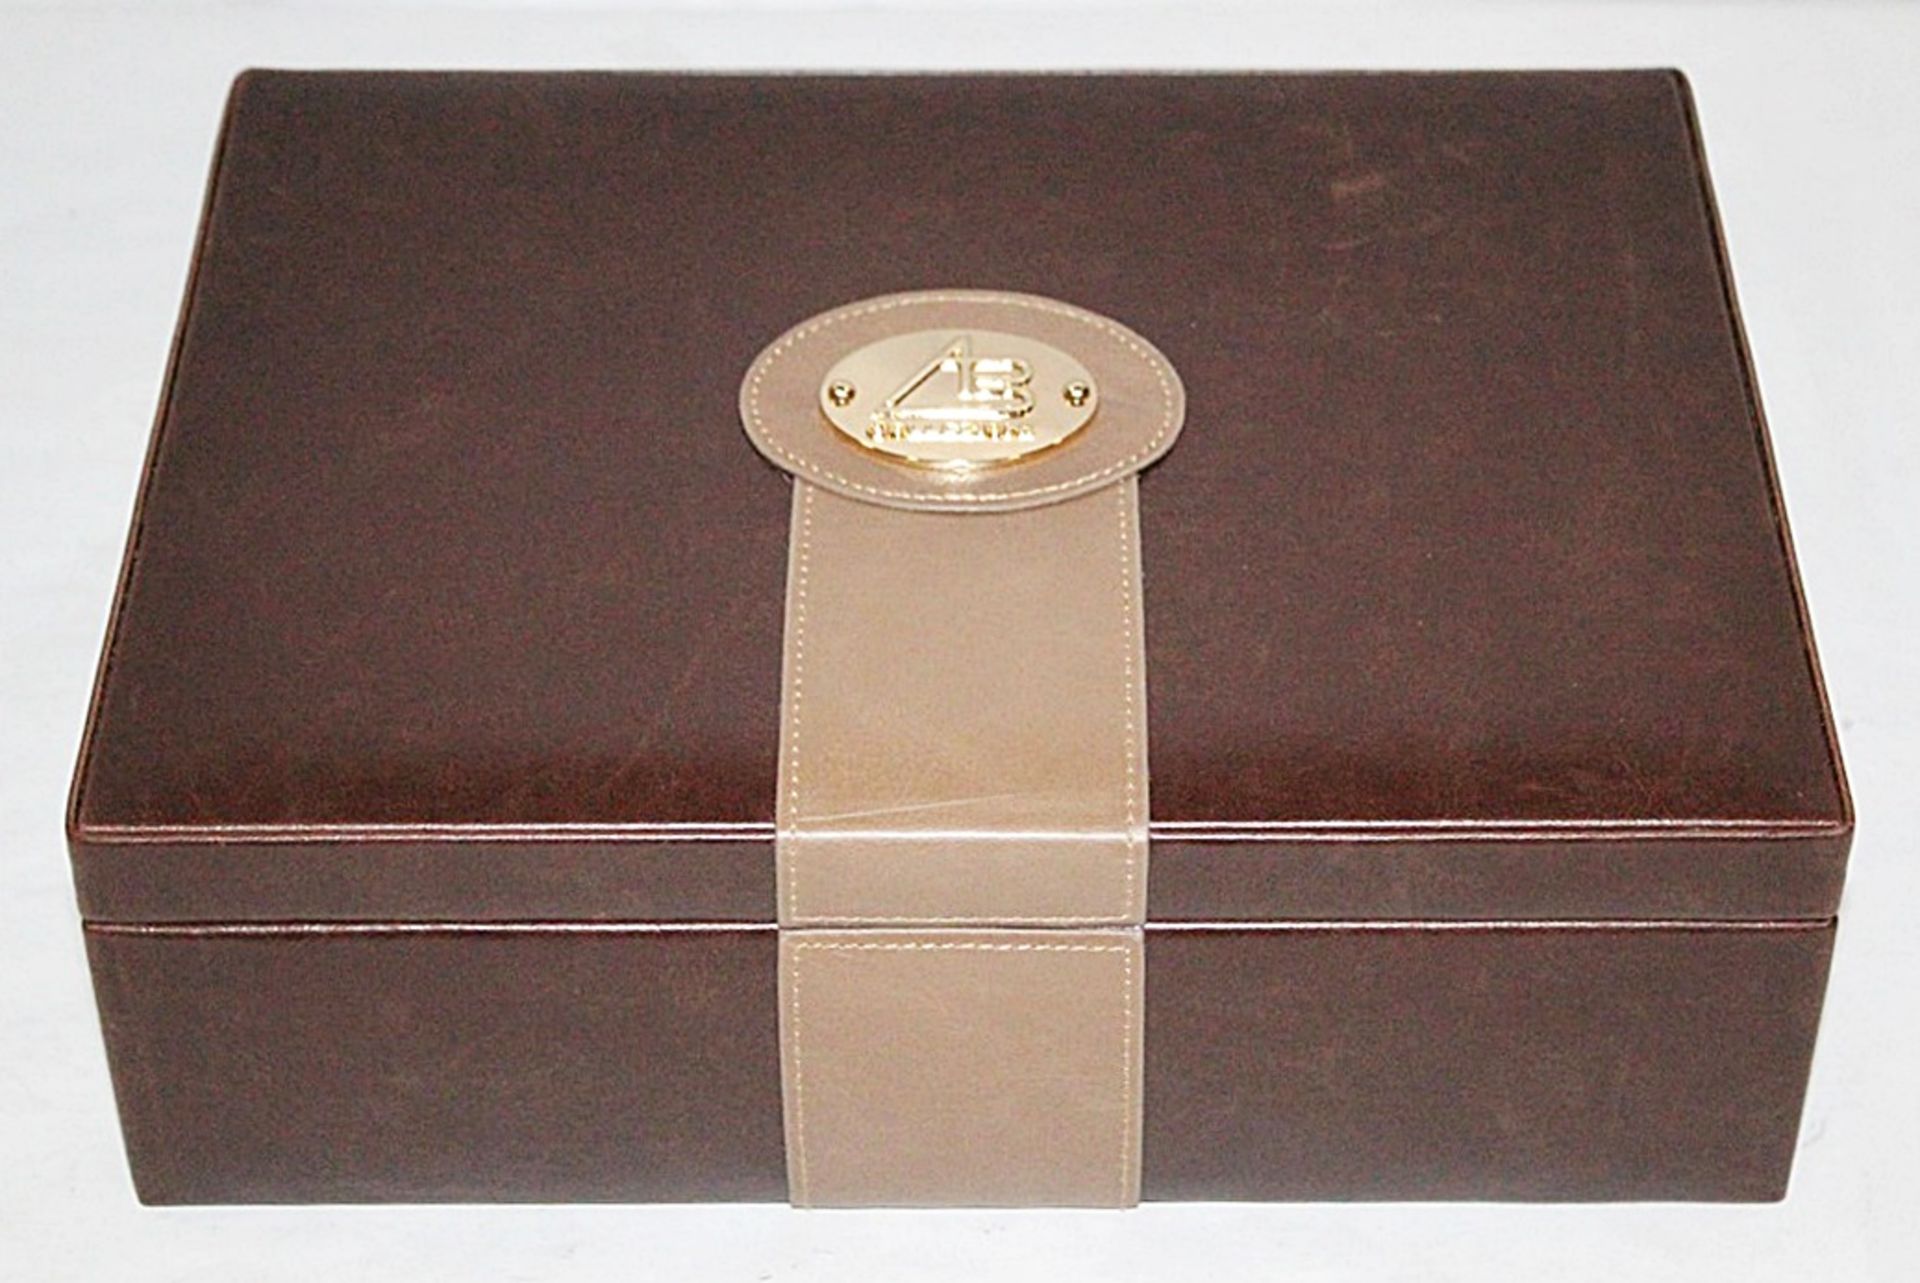 1 x "AB Collezioni" Italian Luxury Brown Leather Watch Case (34040) - Ref LT129 - Dimensions: - Image 3 of 3